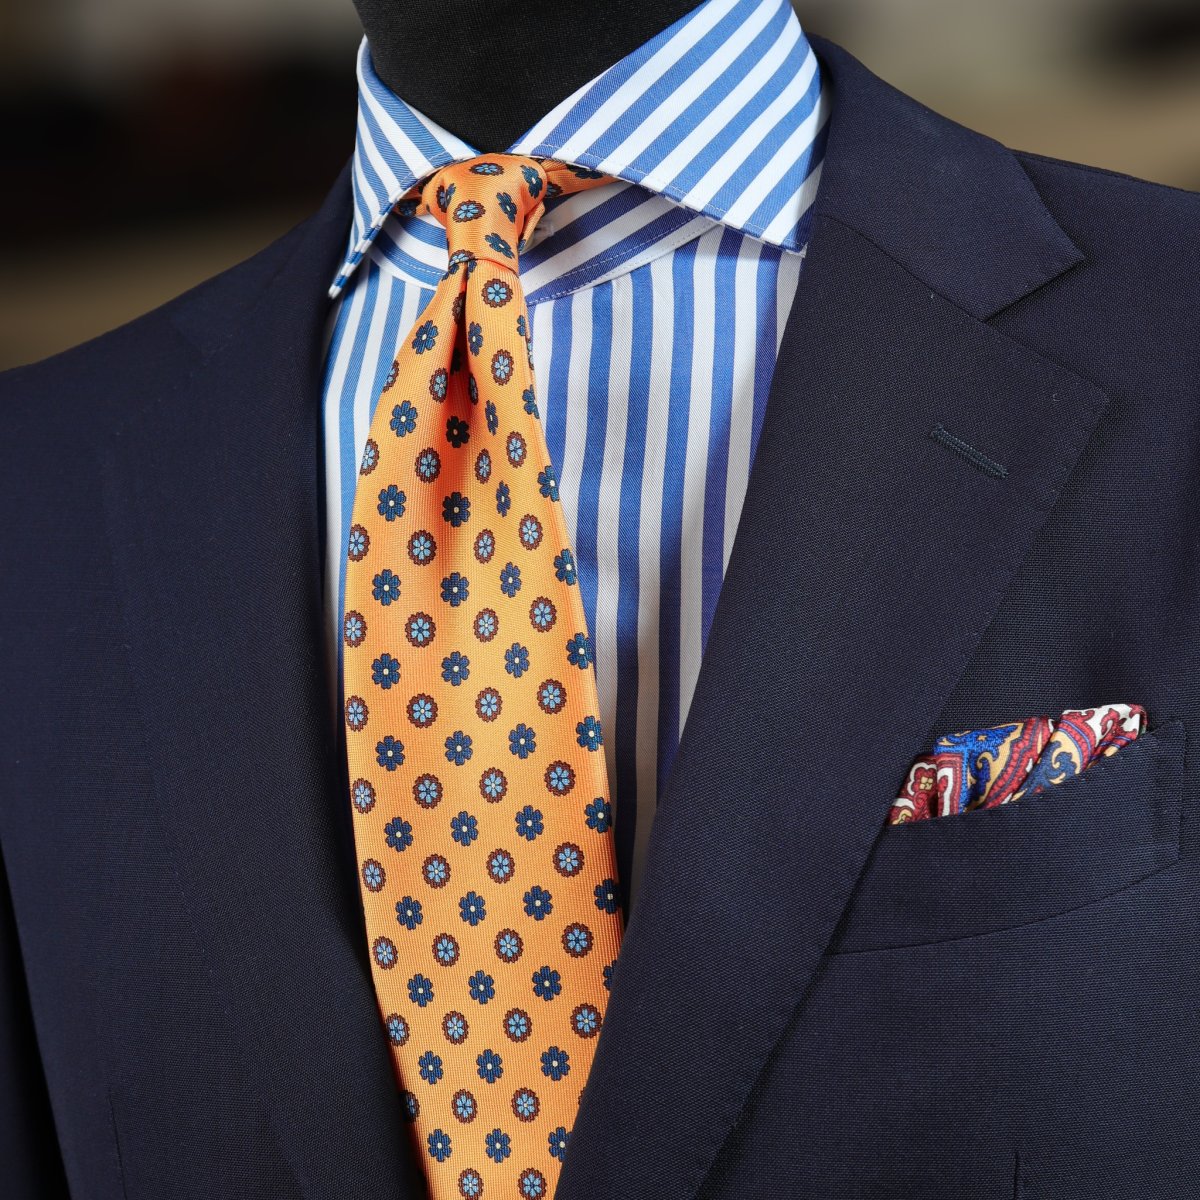 Blue suit, striped blue shirt and yellow tie with floral pattern combination